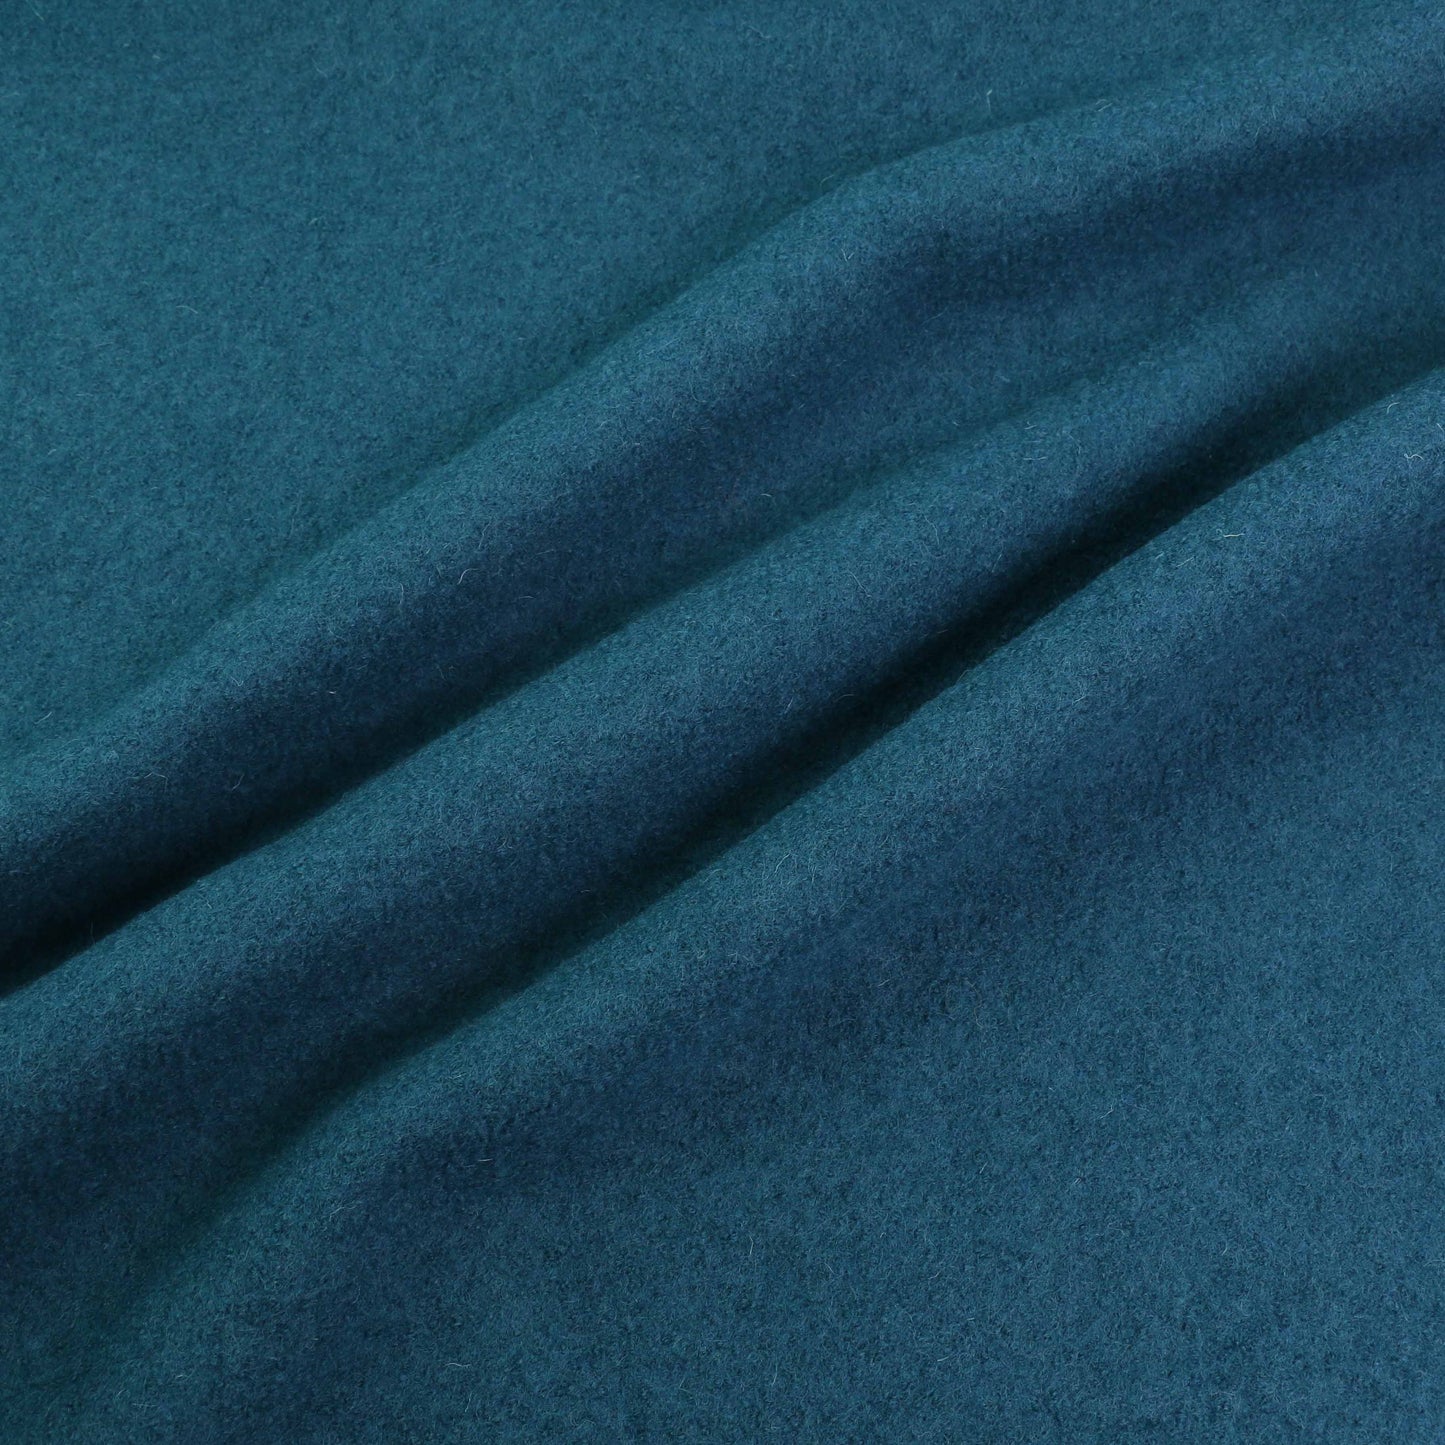 Boiled Wool Fabric - Teal, mustard, charcoal, black, navy